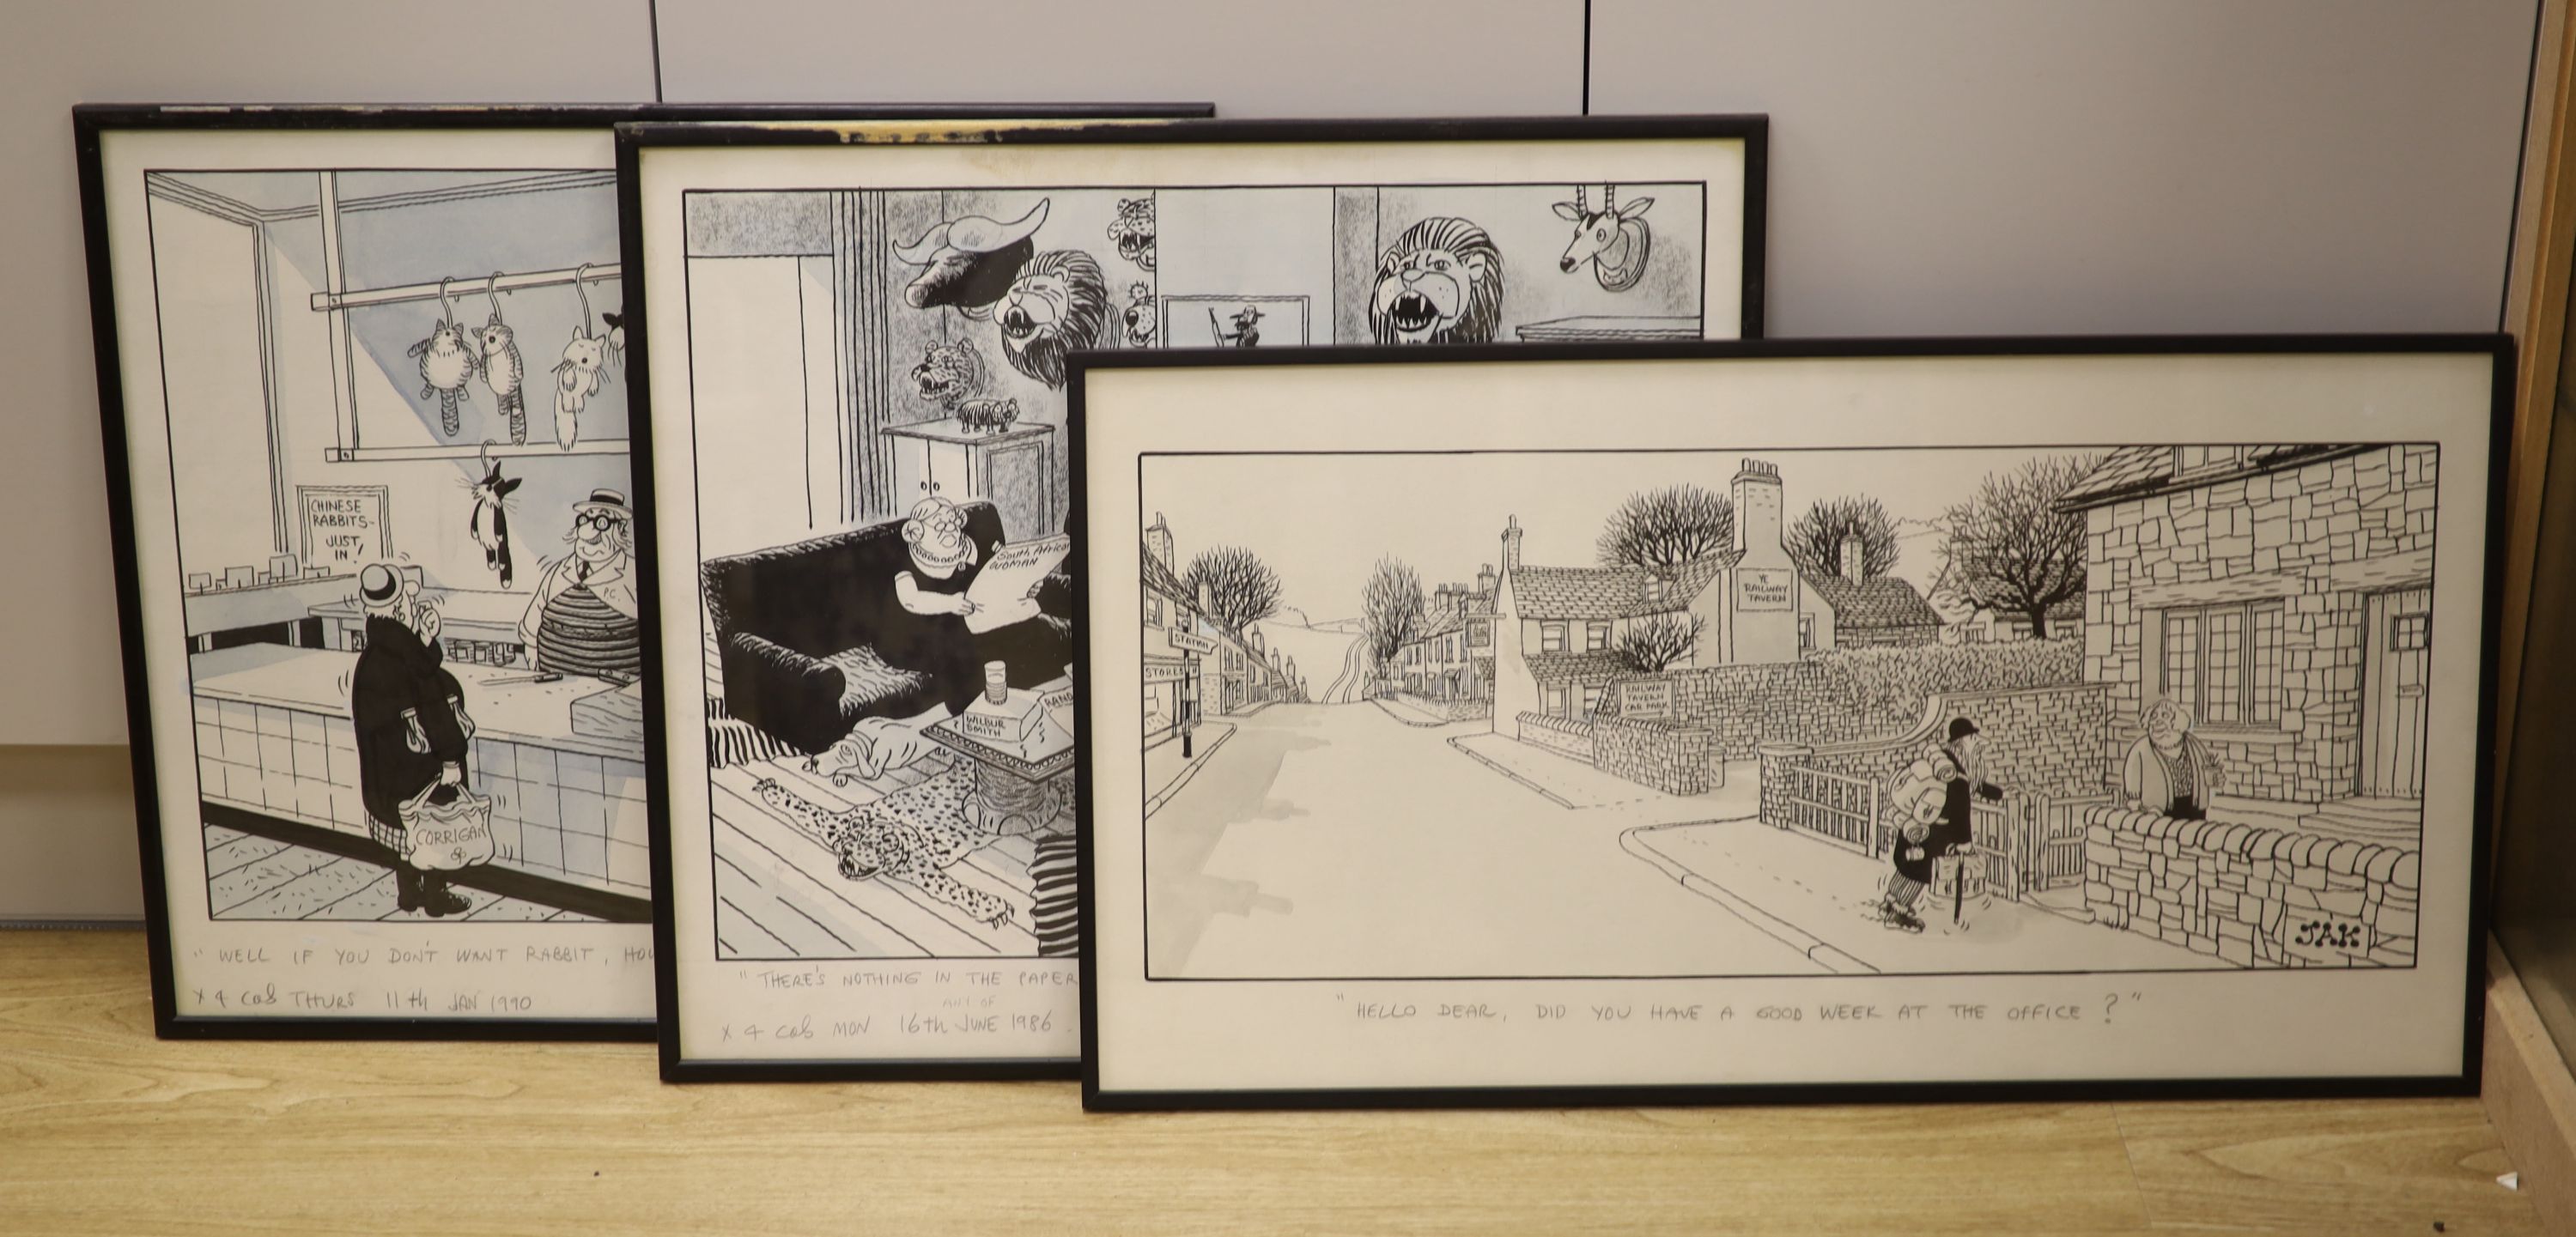 JAK (Raymond Allen Jackson) (1927-1997), three original artwork cartoons, 'Nothing in the papers', 'Don't want rabbit' and 'Good week at the office', all inscribed in pencil and dated 1986-1990, 51 x 59cm and 40 x 76cm